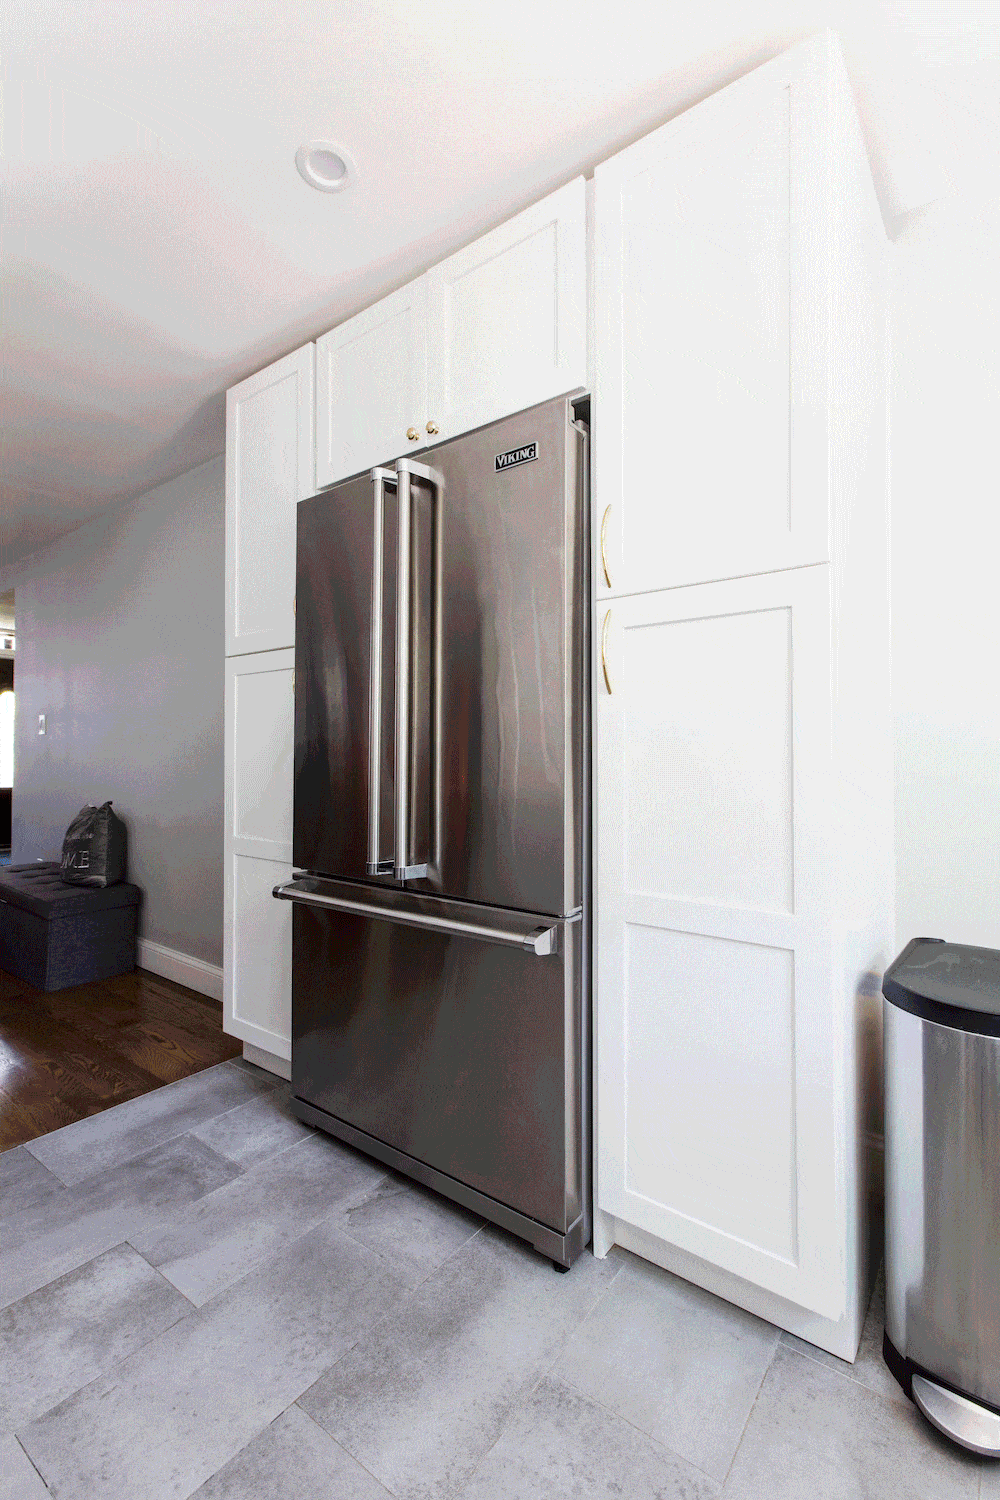 white kitchen cabinets around refrigerator or wrap around fridge pantry with grey floor tiles after renovation